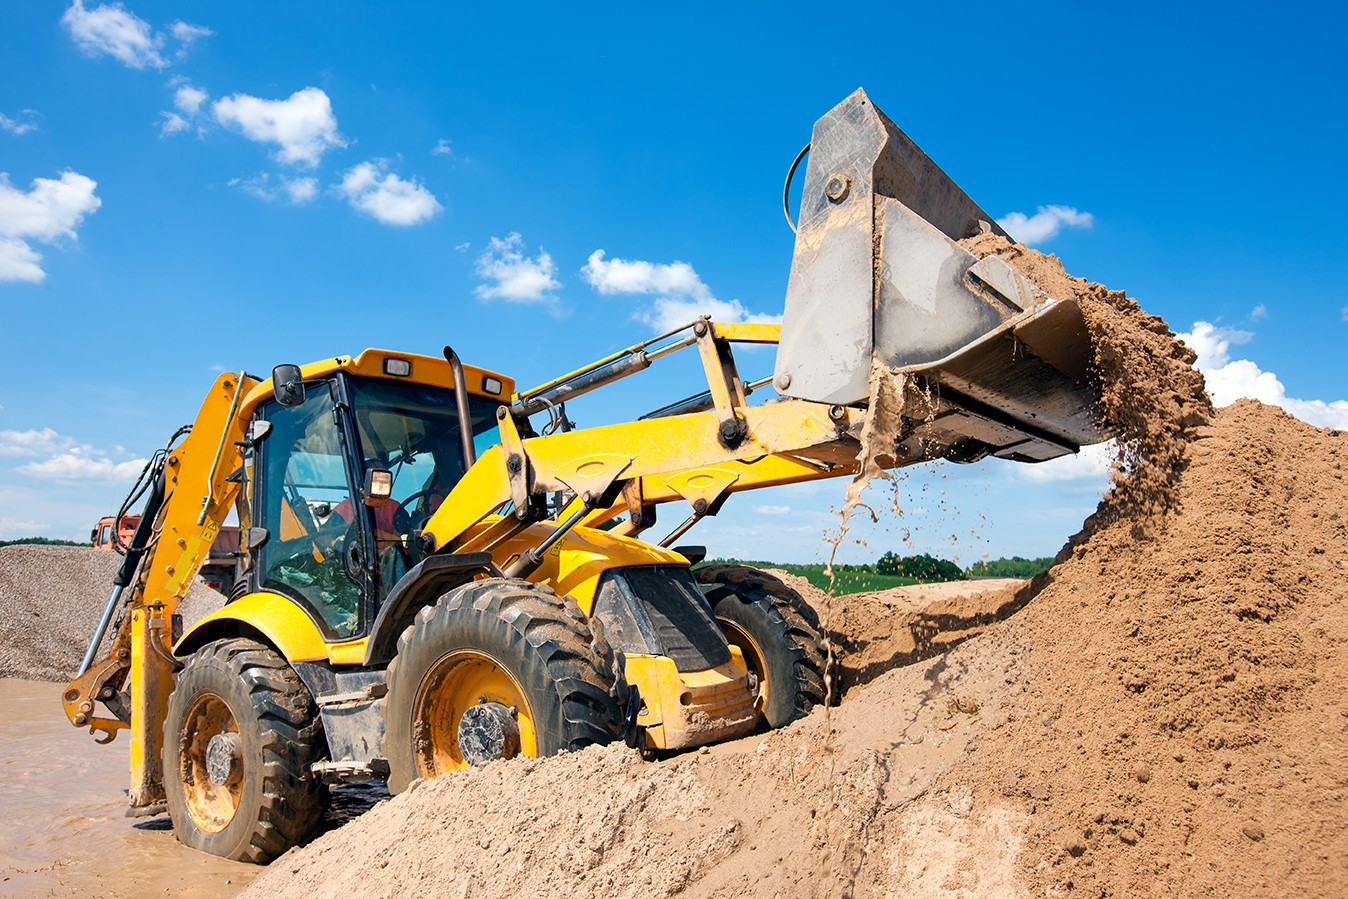 Backhoe and frontend loader safety requires thorough operator training, regular equipment maintenance, and strict adherence to safe operating practices to prevent accidents and injuries associated with excavation, lifting, and material handling.